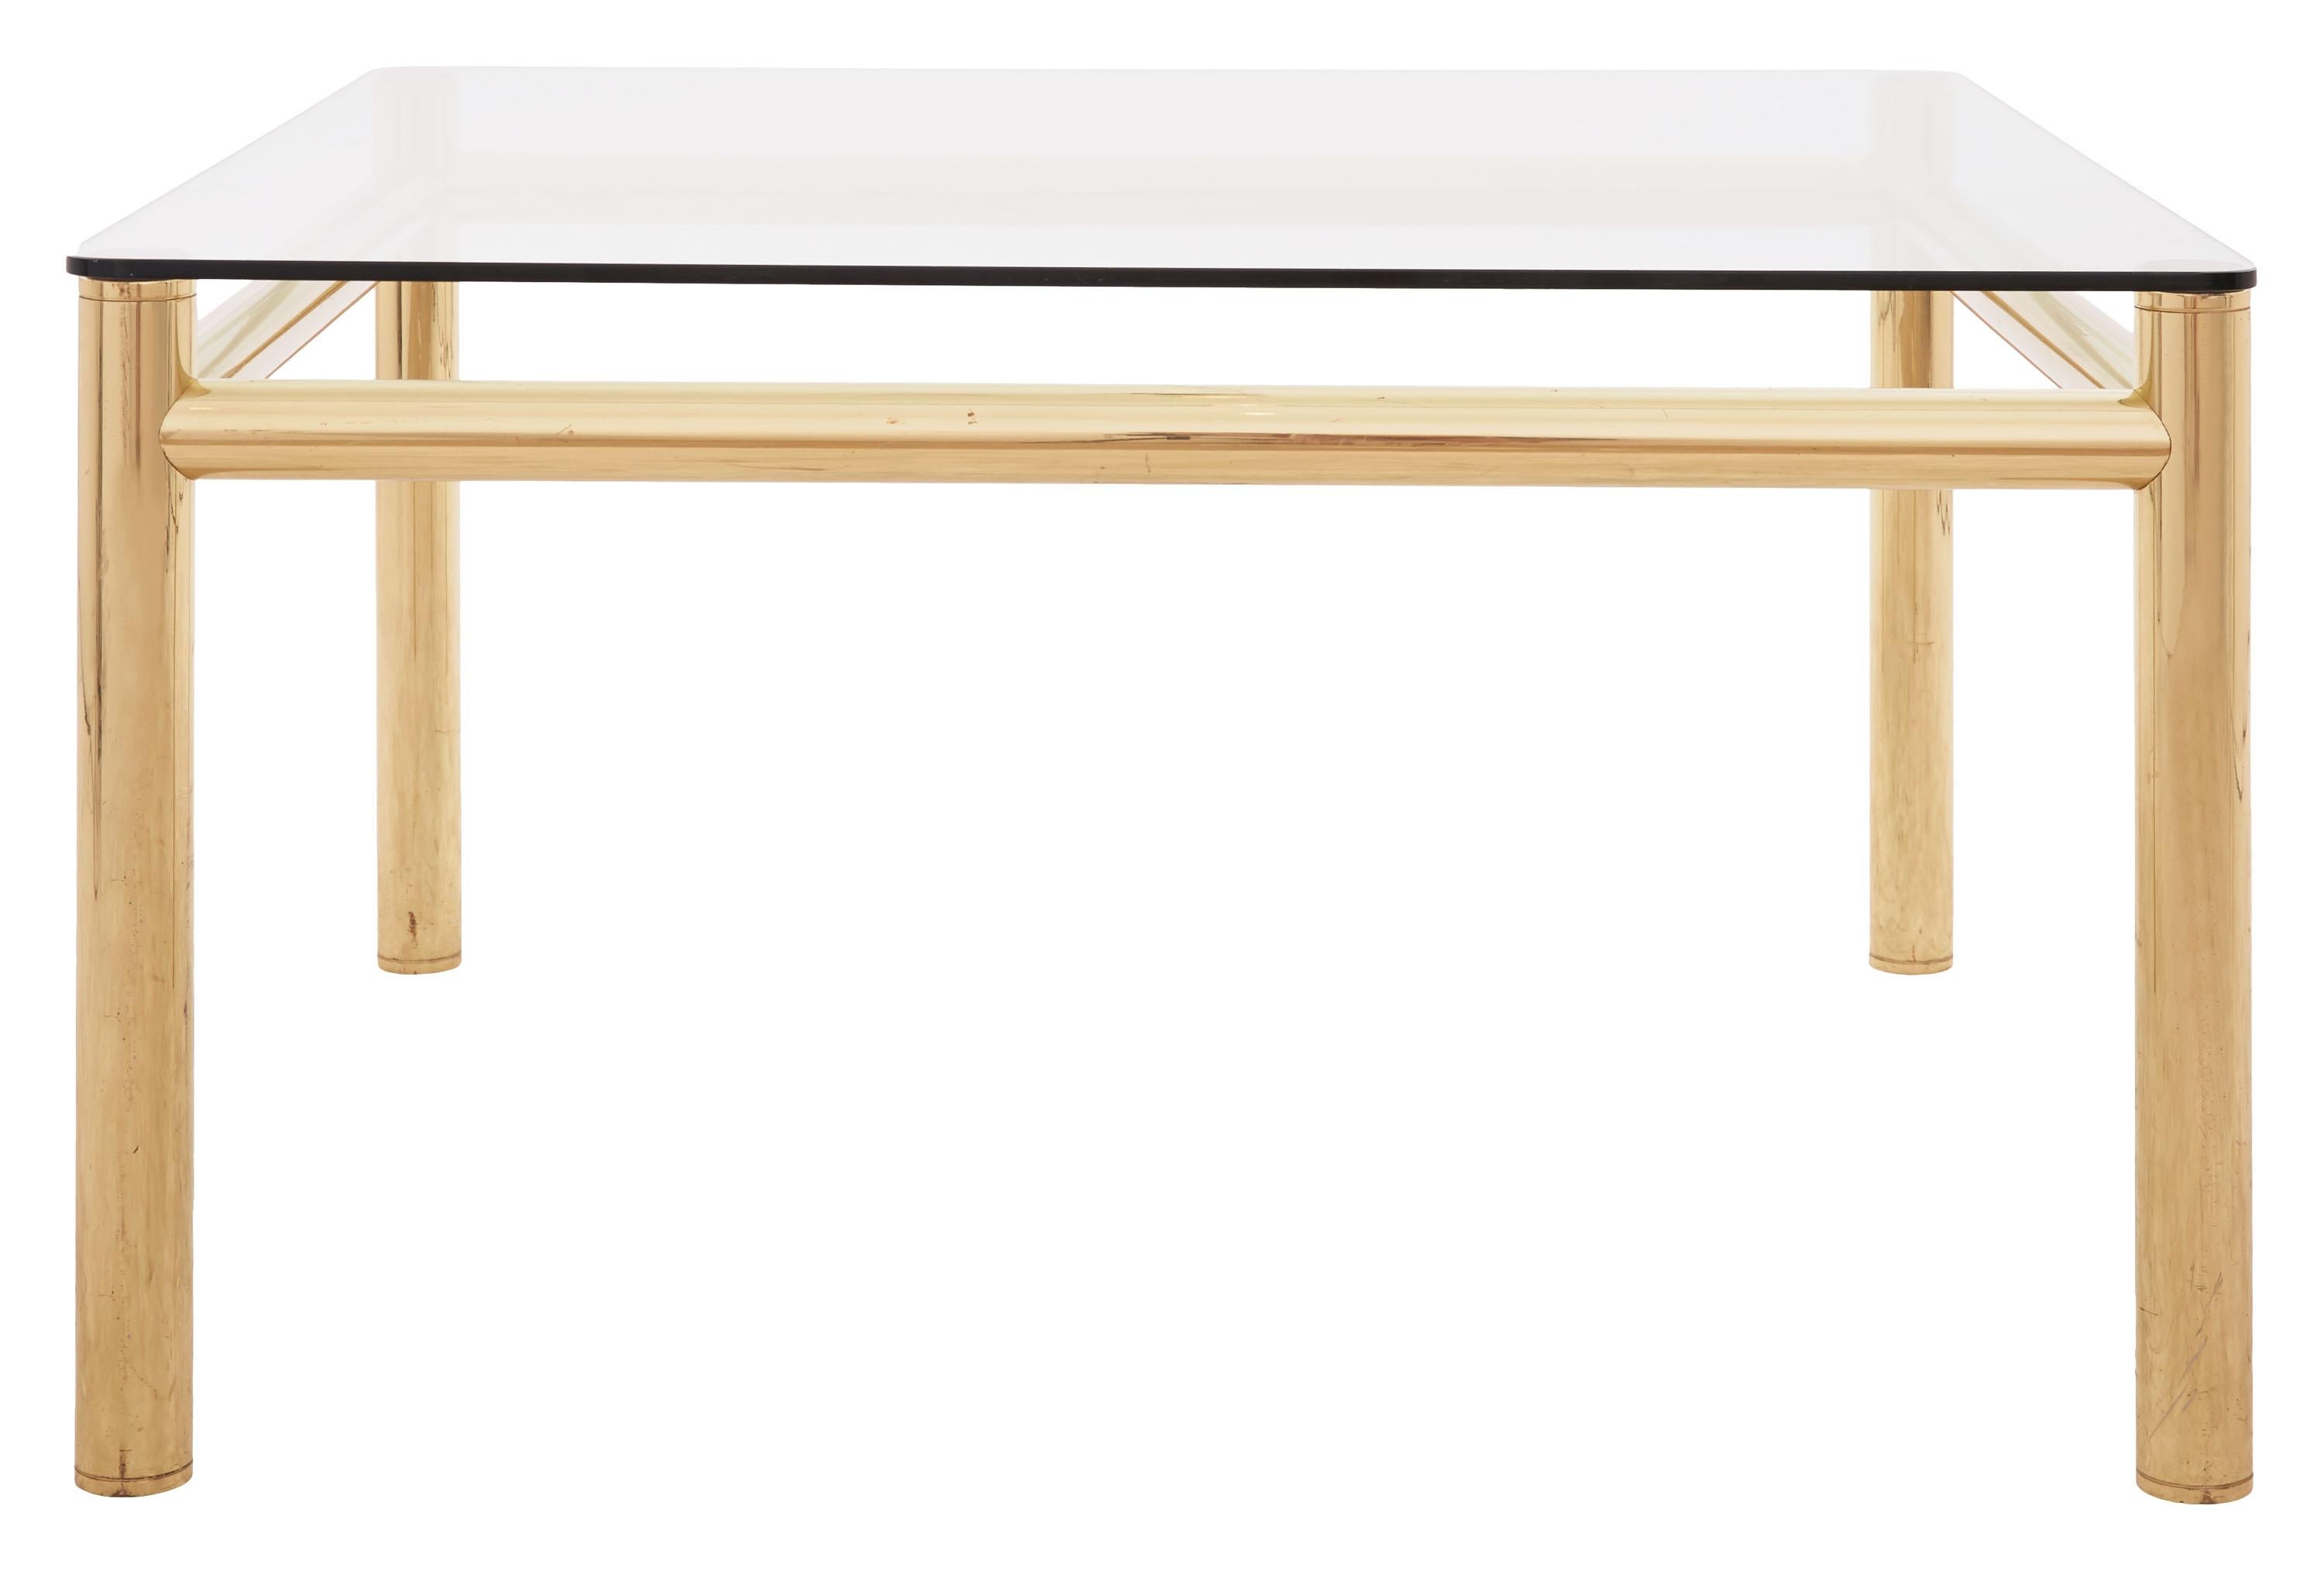 Mid-Century Modern Midcentury Square Brass Dining Table with Leather Pad Detail For Sale